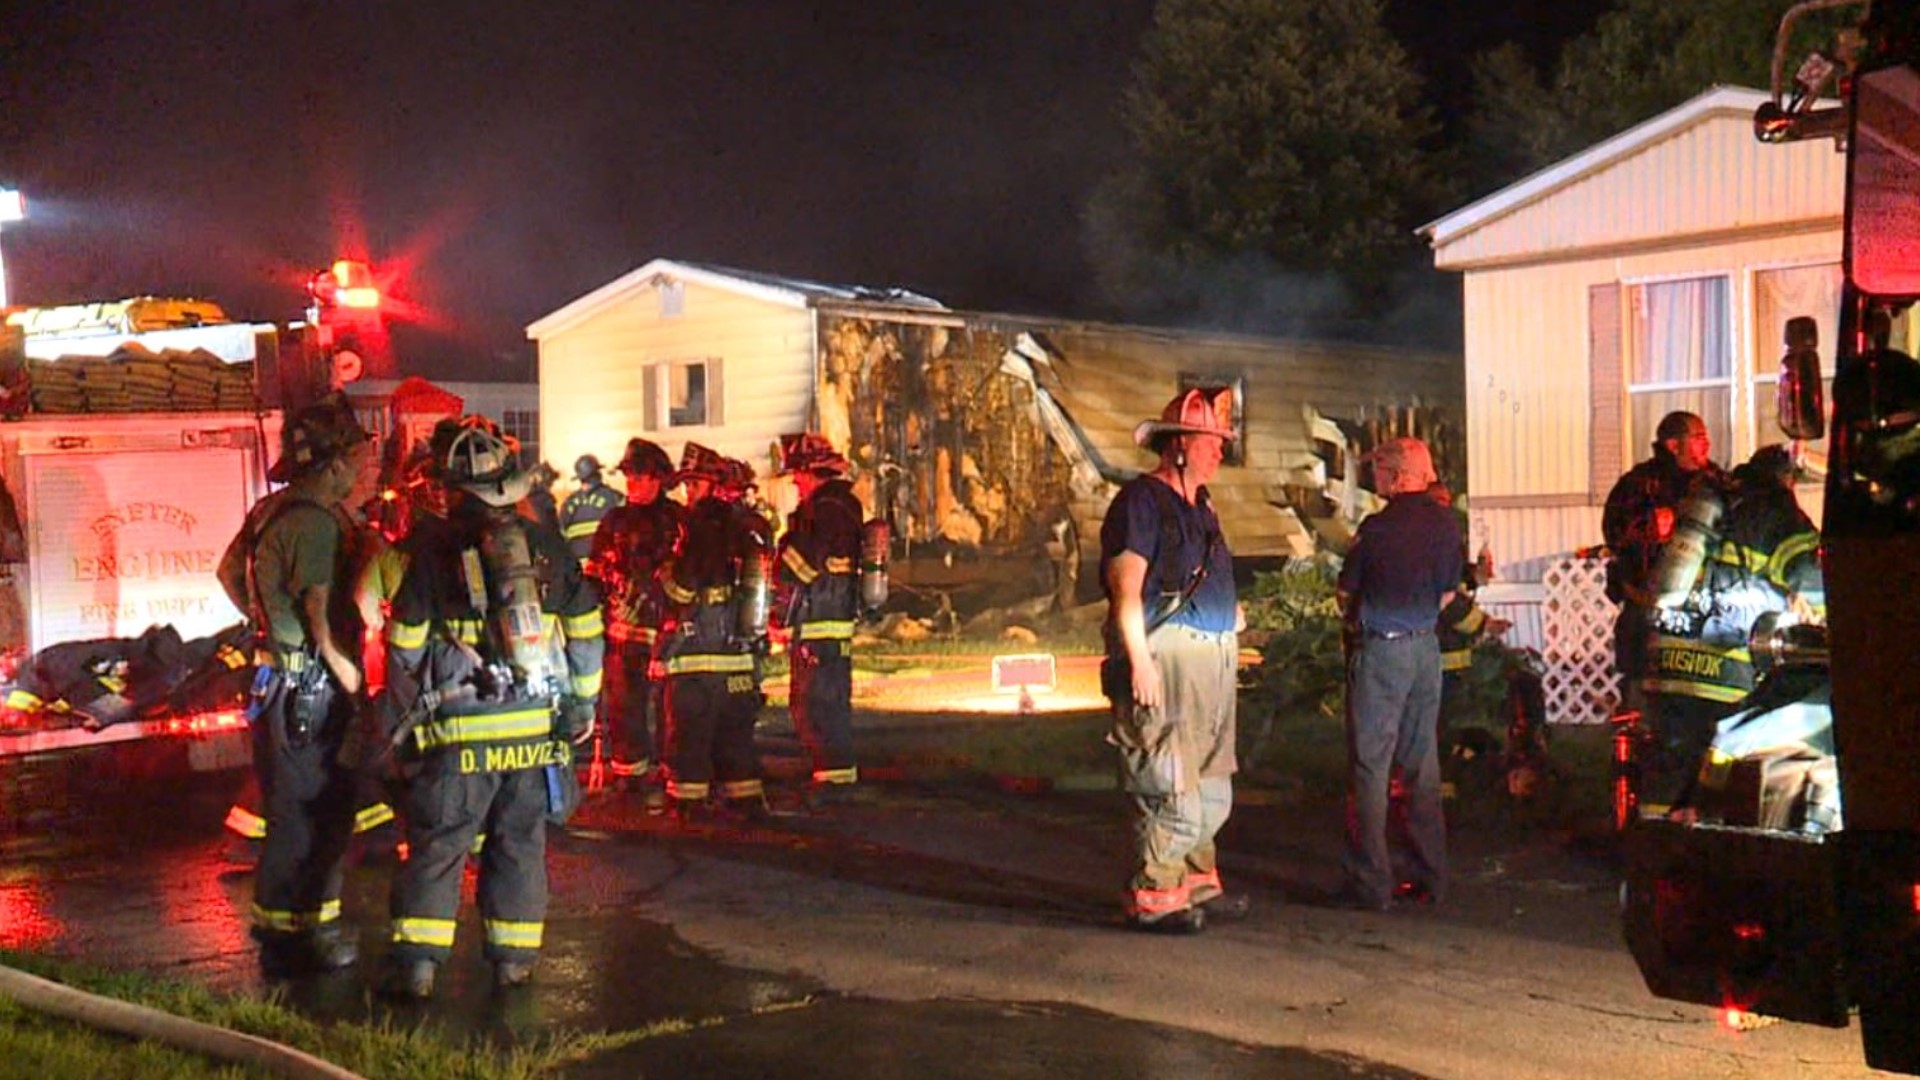 A fire tore through a mobile home early Thursday morning in Exeter.